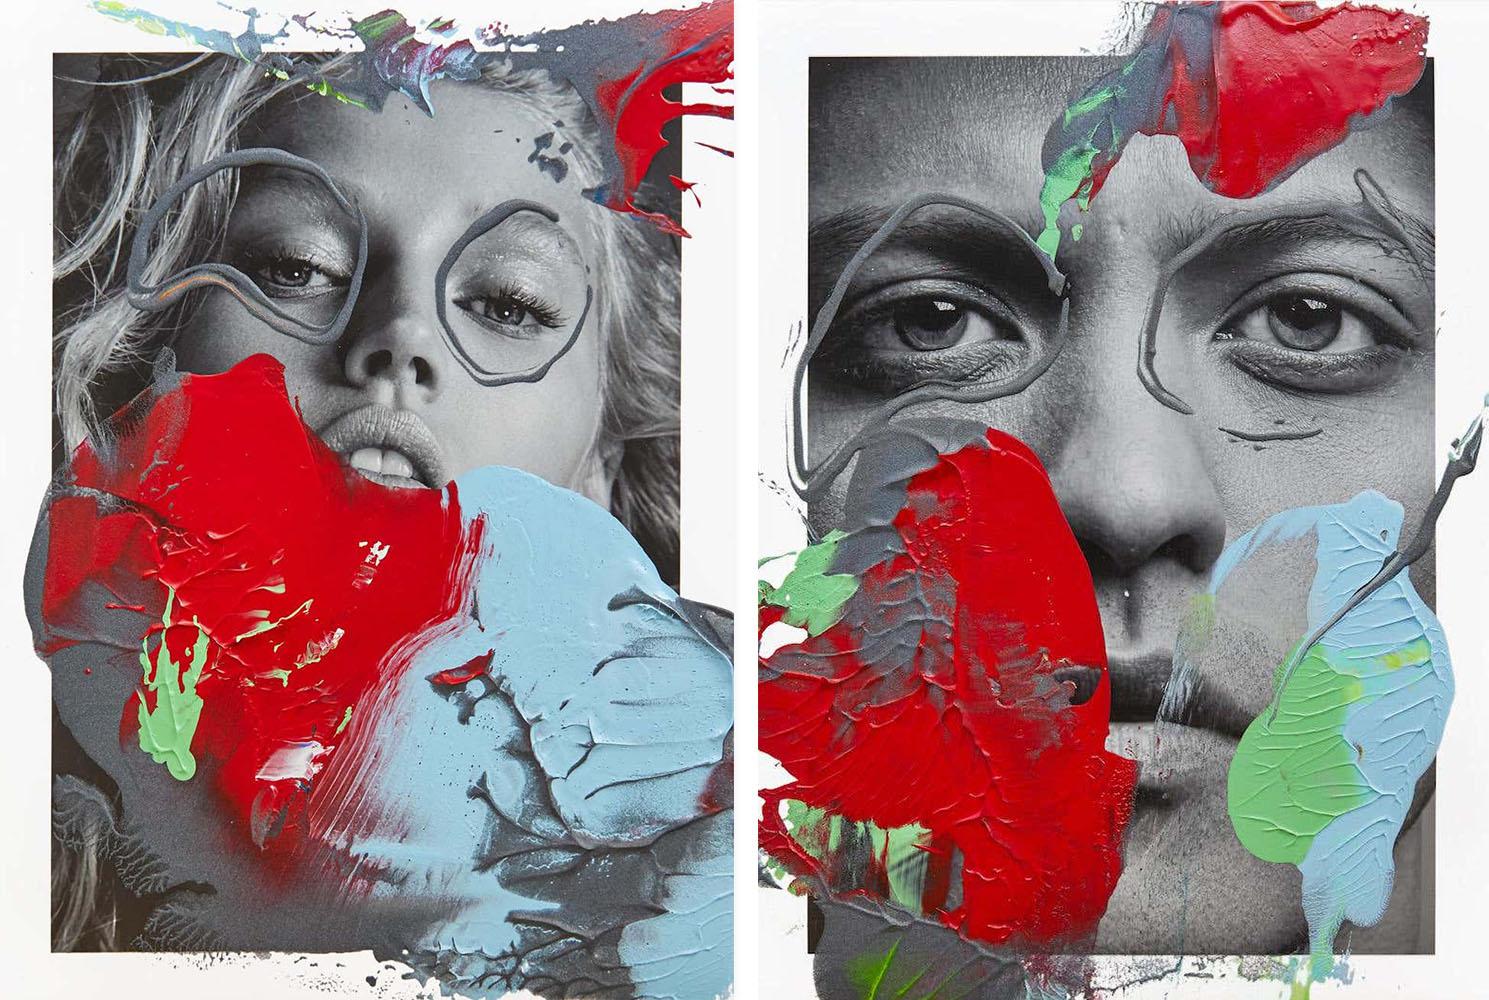 Diptych: Muse and Mars, One of a kind photo collage intervened by the artists